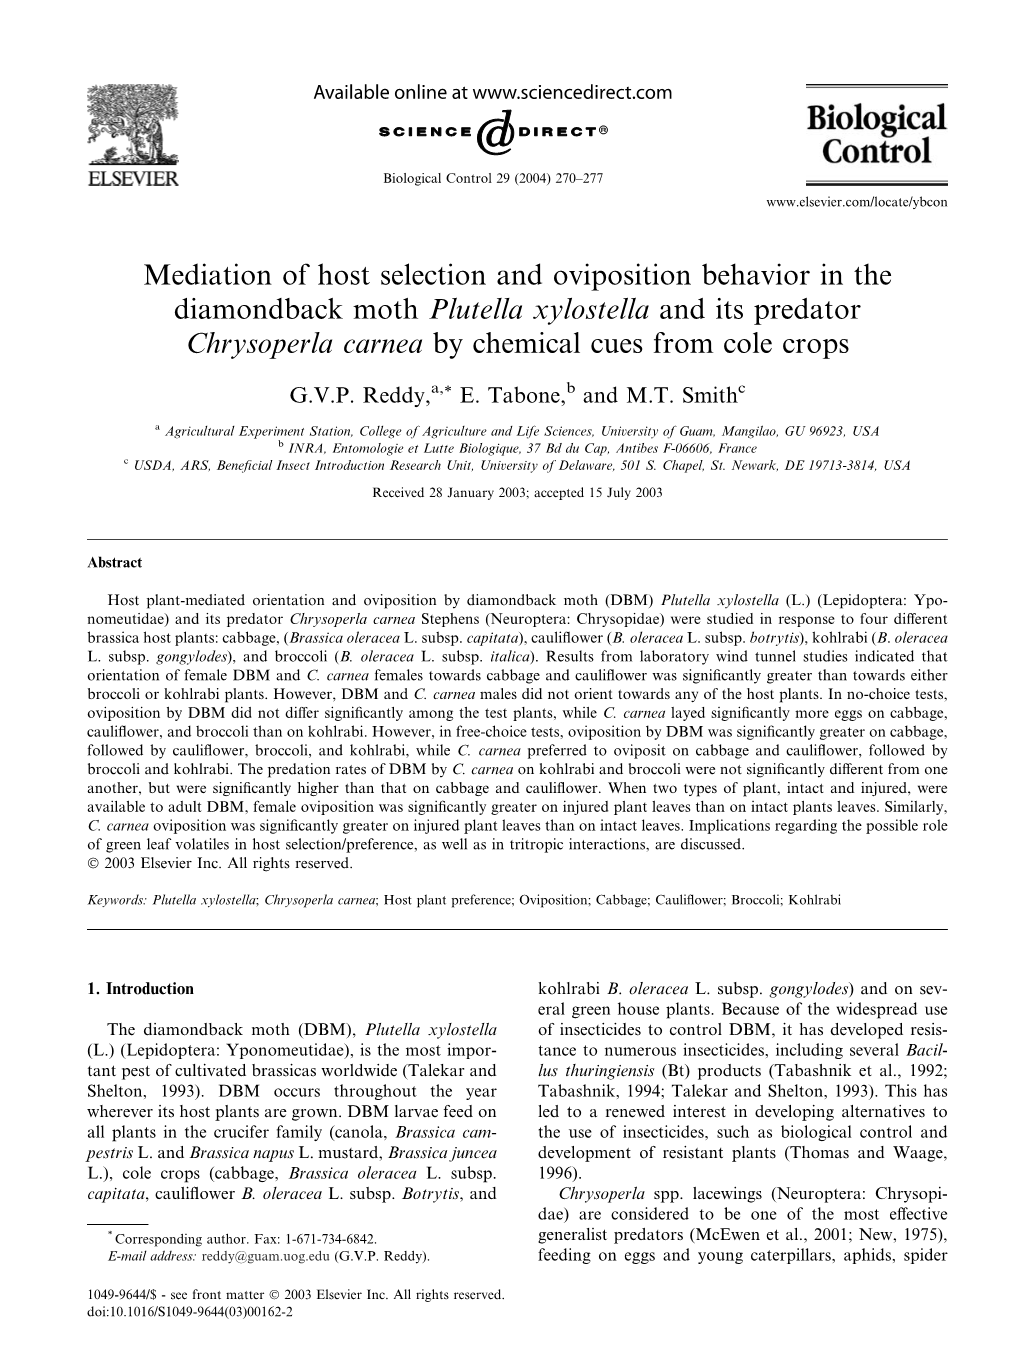 Chrysoperla Carnea by Chemical Cues from Cole Crops